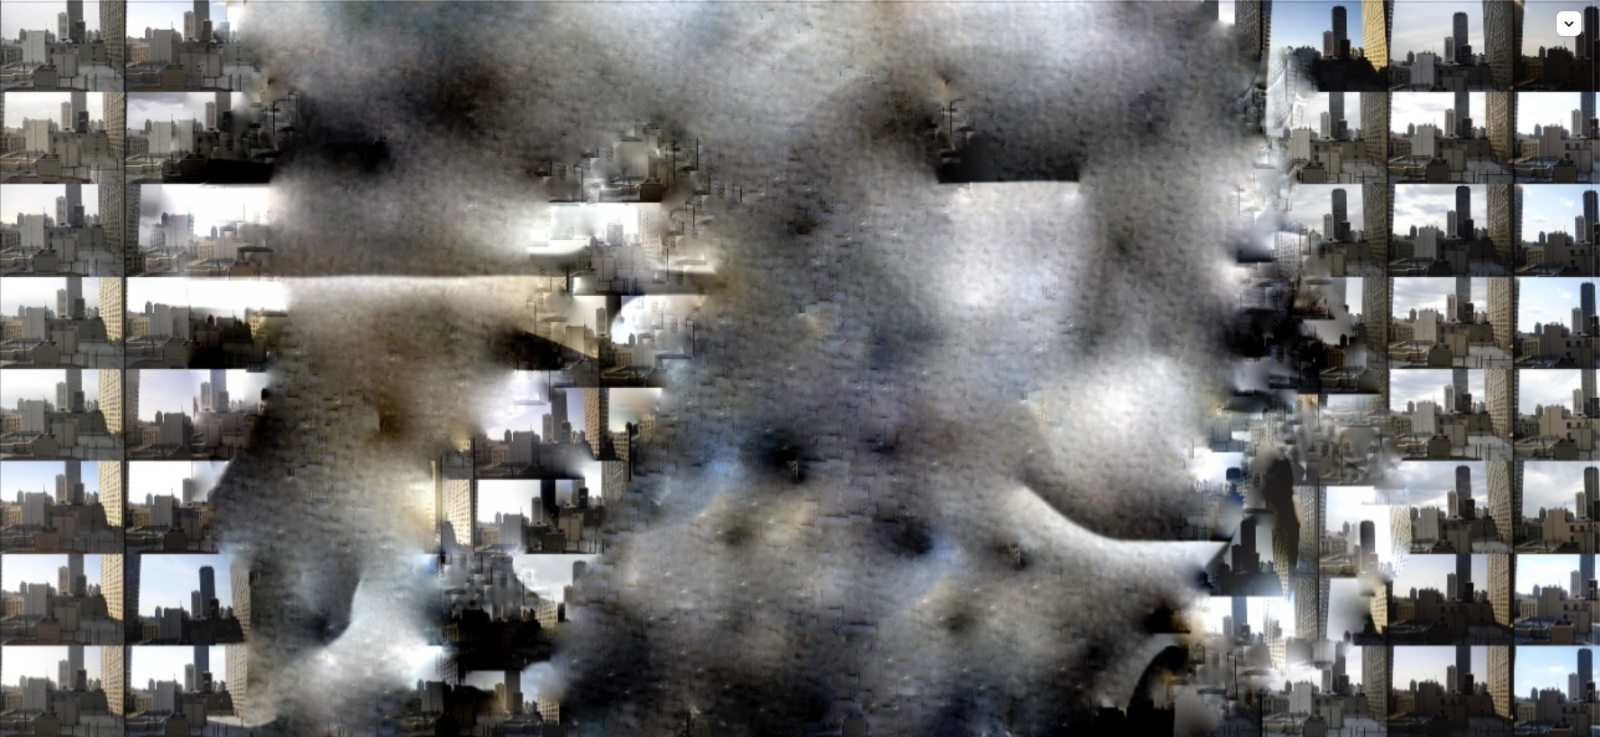 In this photograph, tiny images of the same cityscape repeat across several columns and rows, with the central portion of the whole obscured by a wet-looking blot.